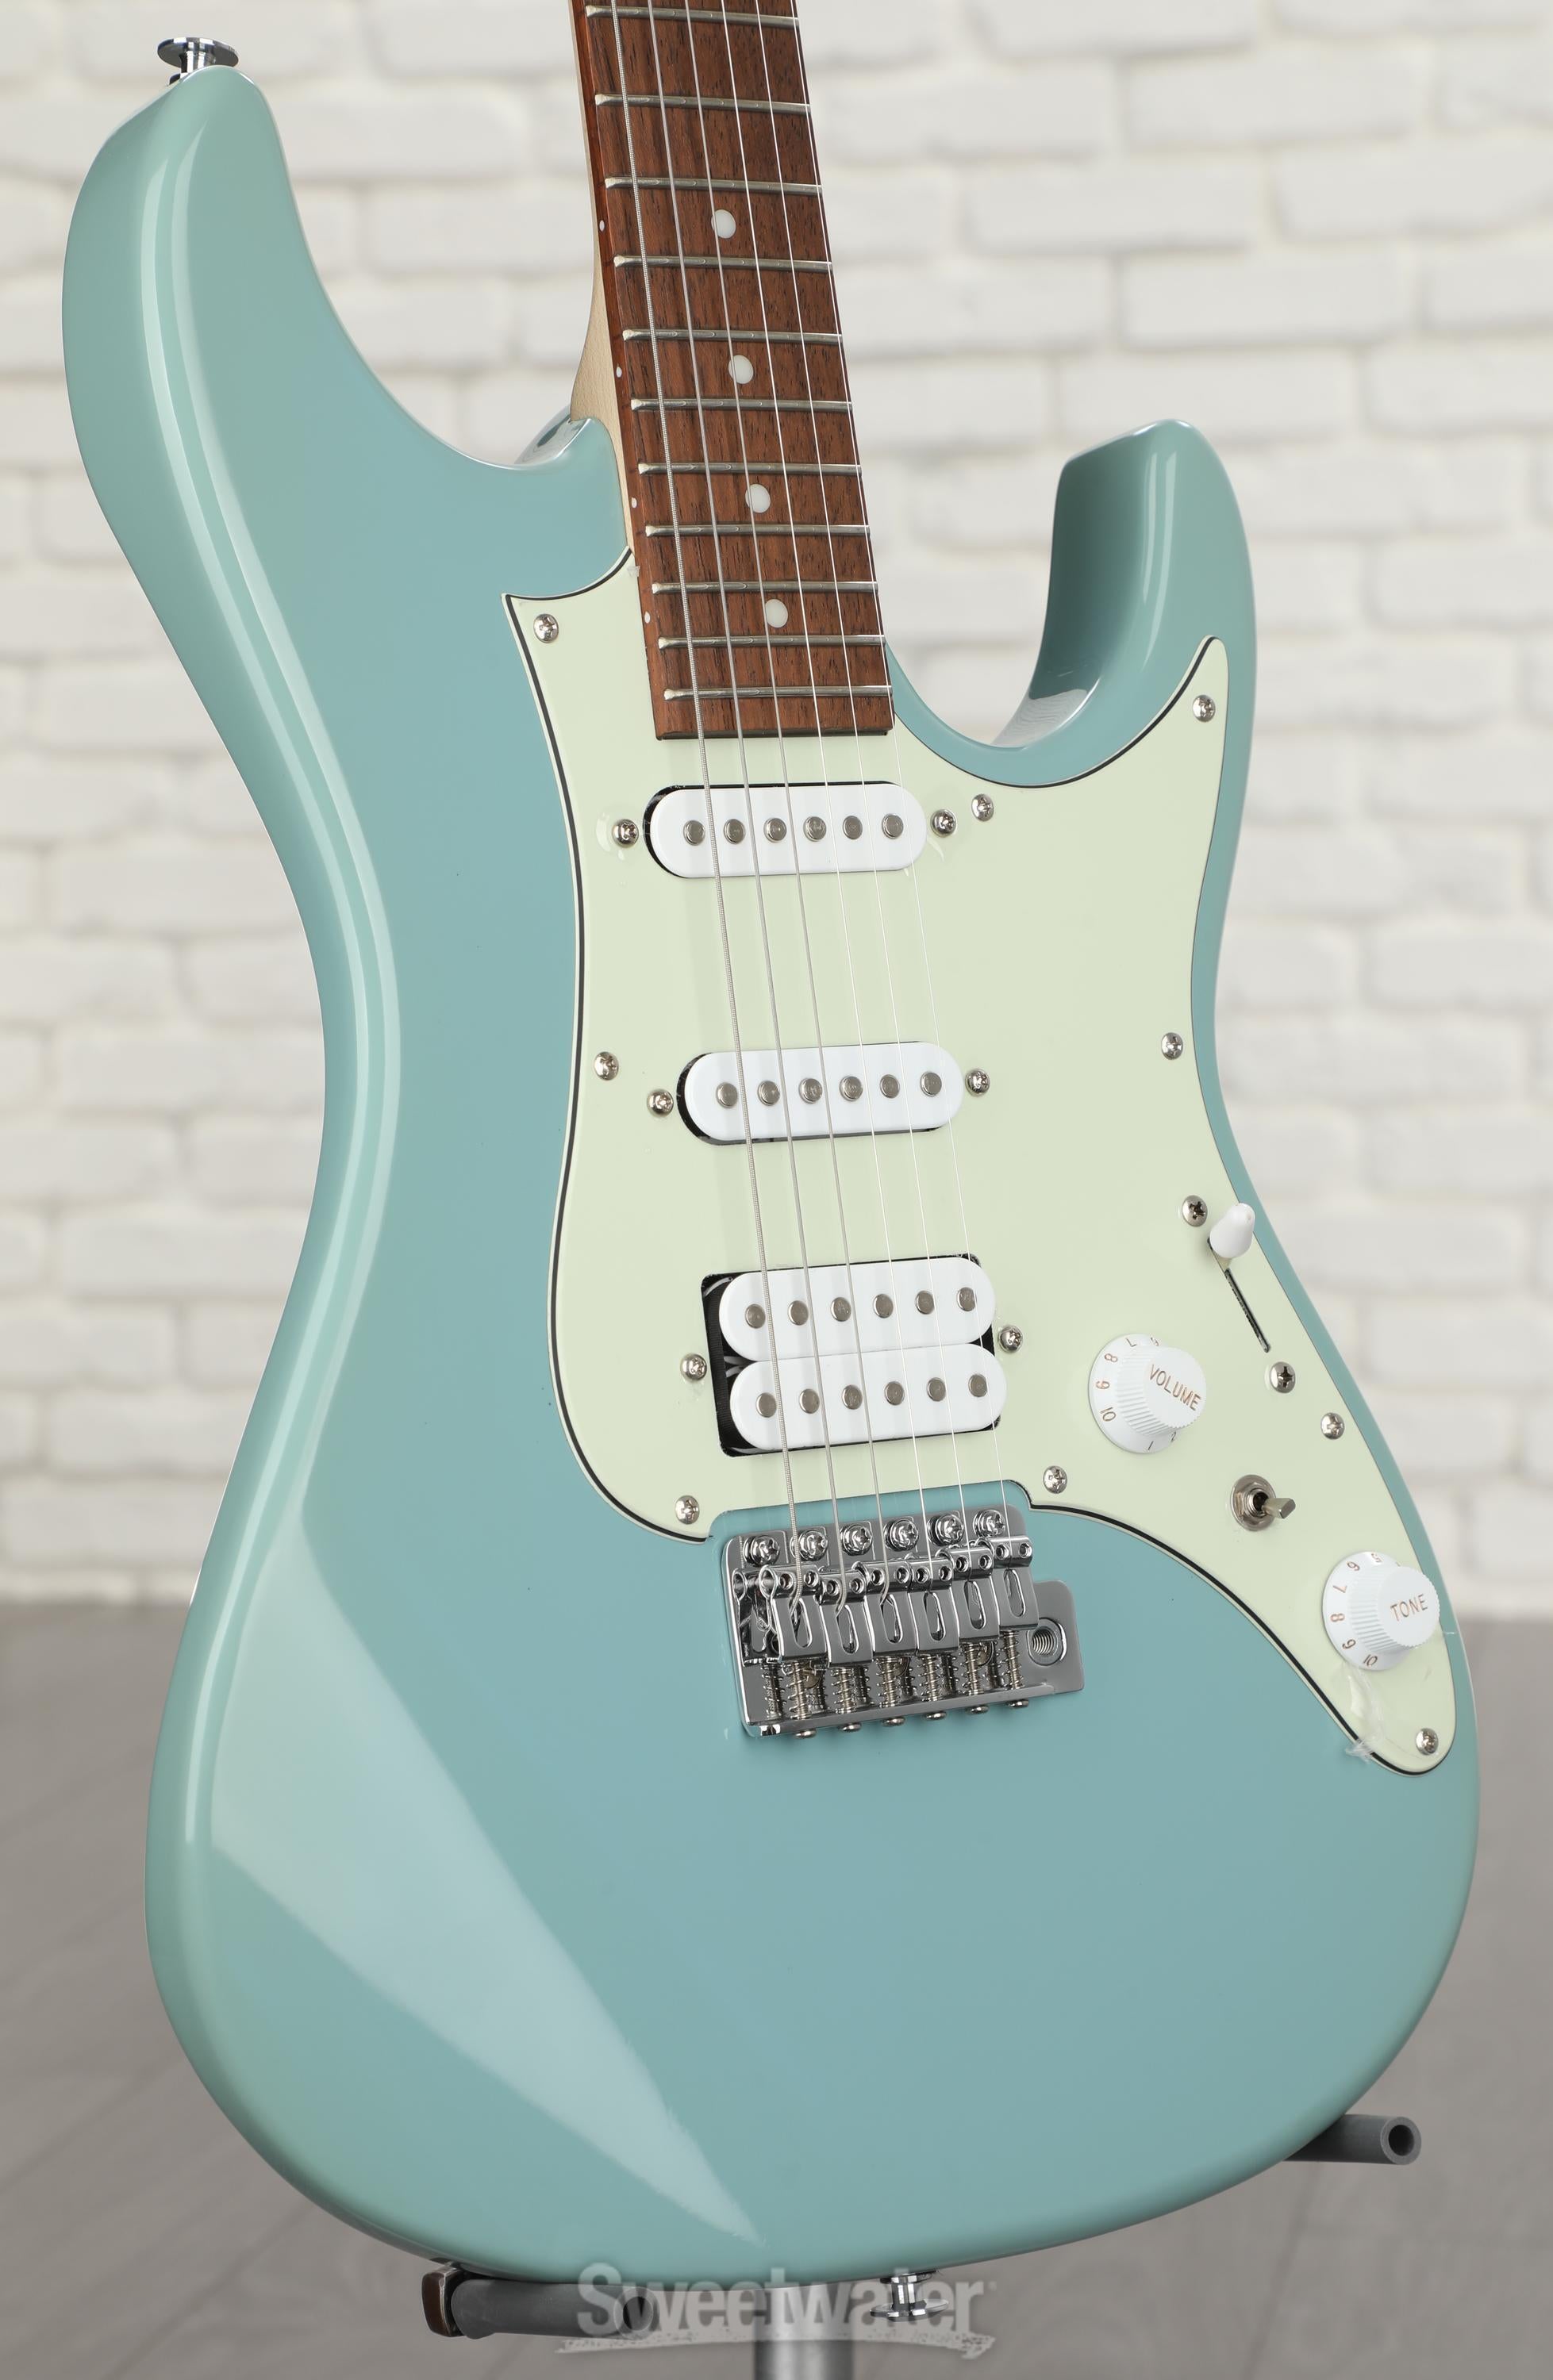 Ibanez AZES Electric Guitar - Purist Blue | Sweetwater